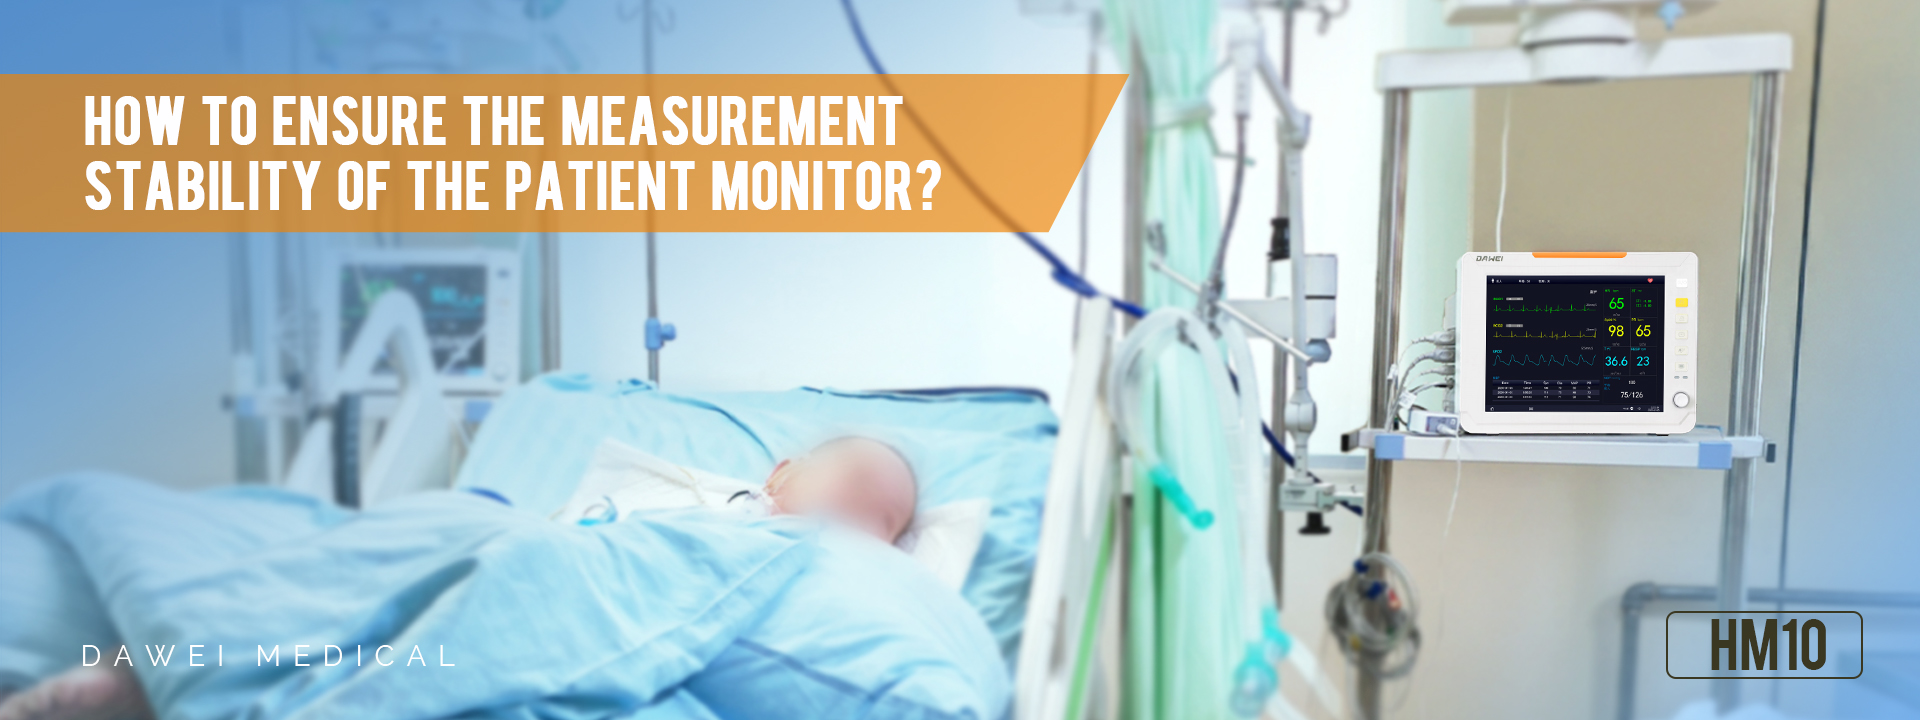 How to ensure the measurement stability of a patient monitor?